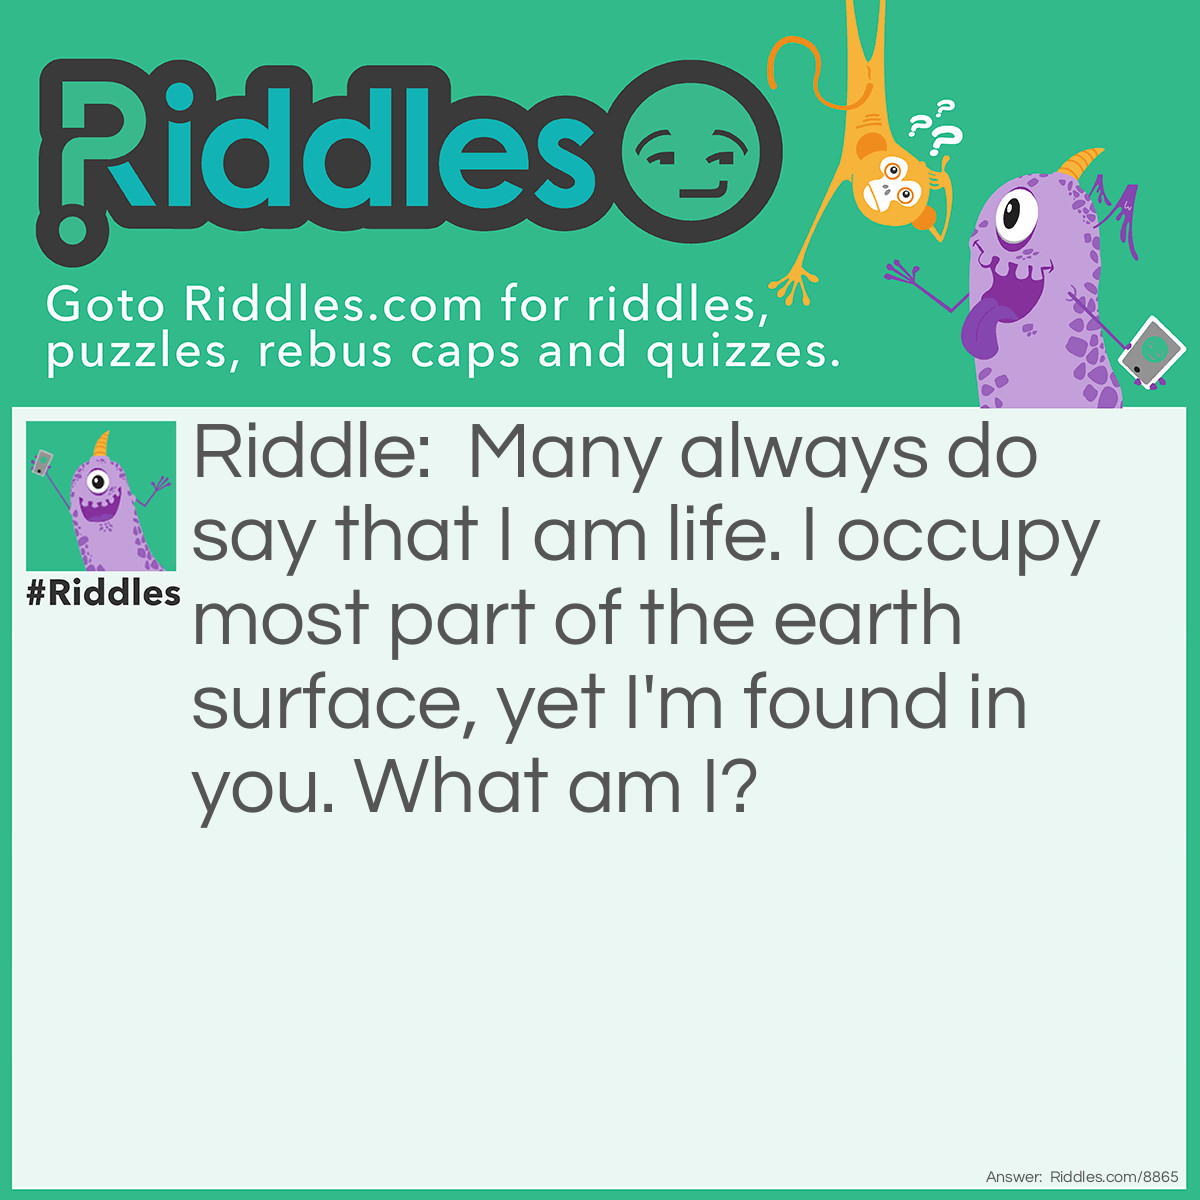 Riddle: Many always do say that I am life. I occupy most part of the earth surface, yet I'm found in you. What am I? Answer: Water.